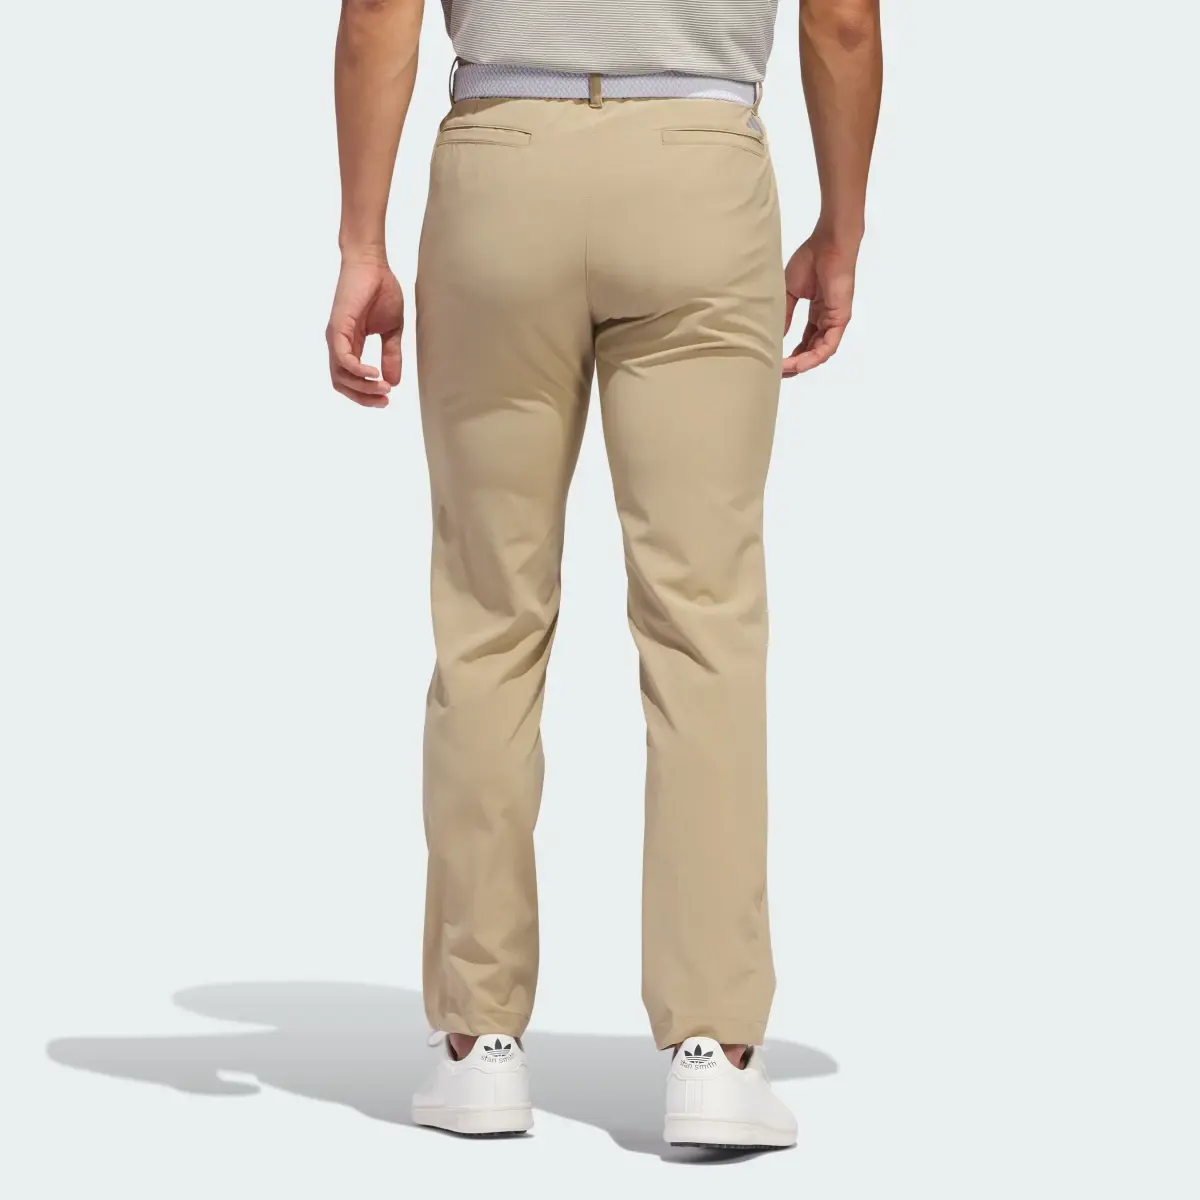 Adidas Ultimate365 Tapered Golf Pants. 2